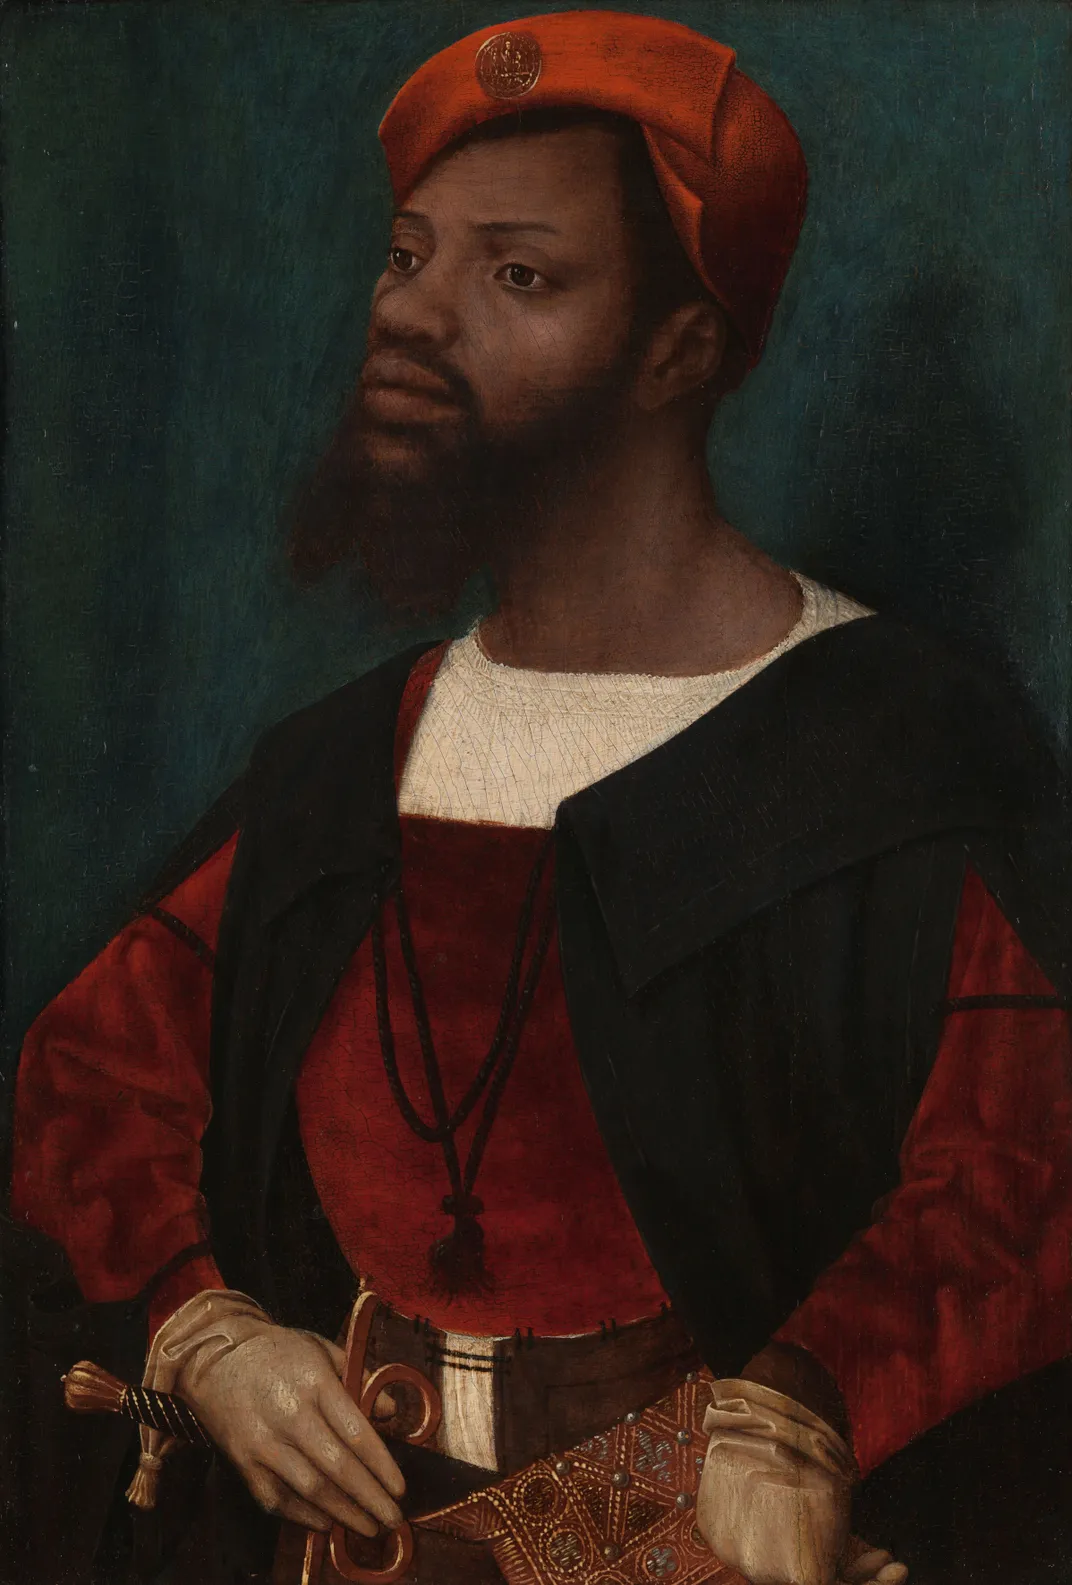 A portrait of a Black man with a beard, in elegant costly dress and posed with his chin raised in a confident position